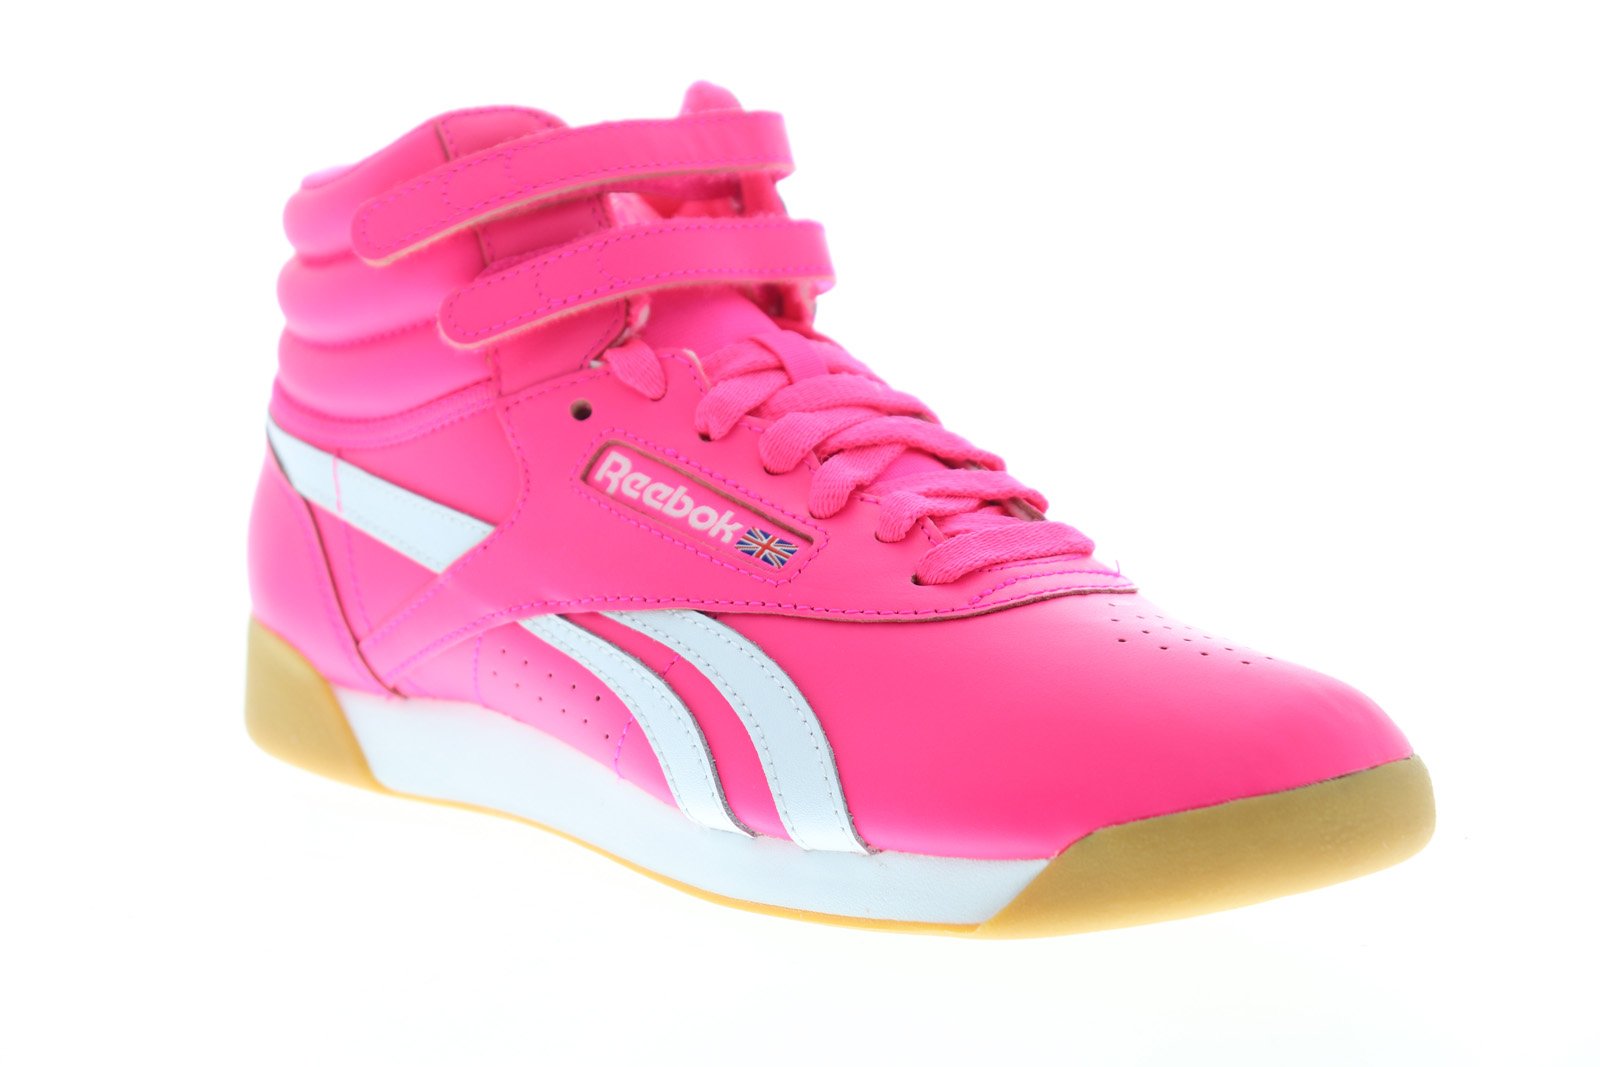 Freestyle HI SU CN7150 Womens Pink Leather Lifestyle Sneakers - Shoes